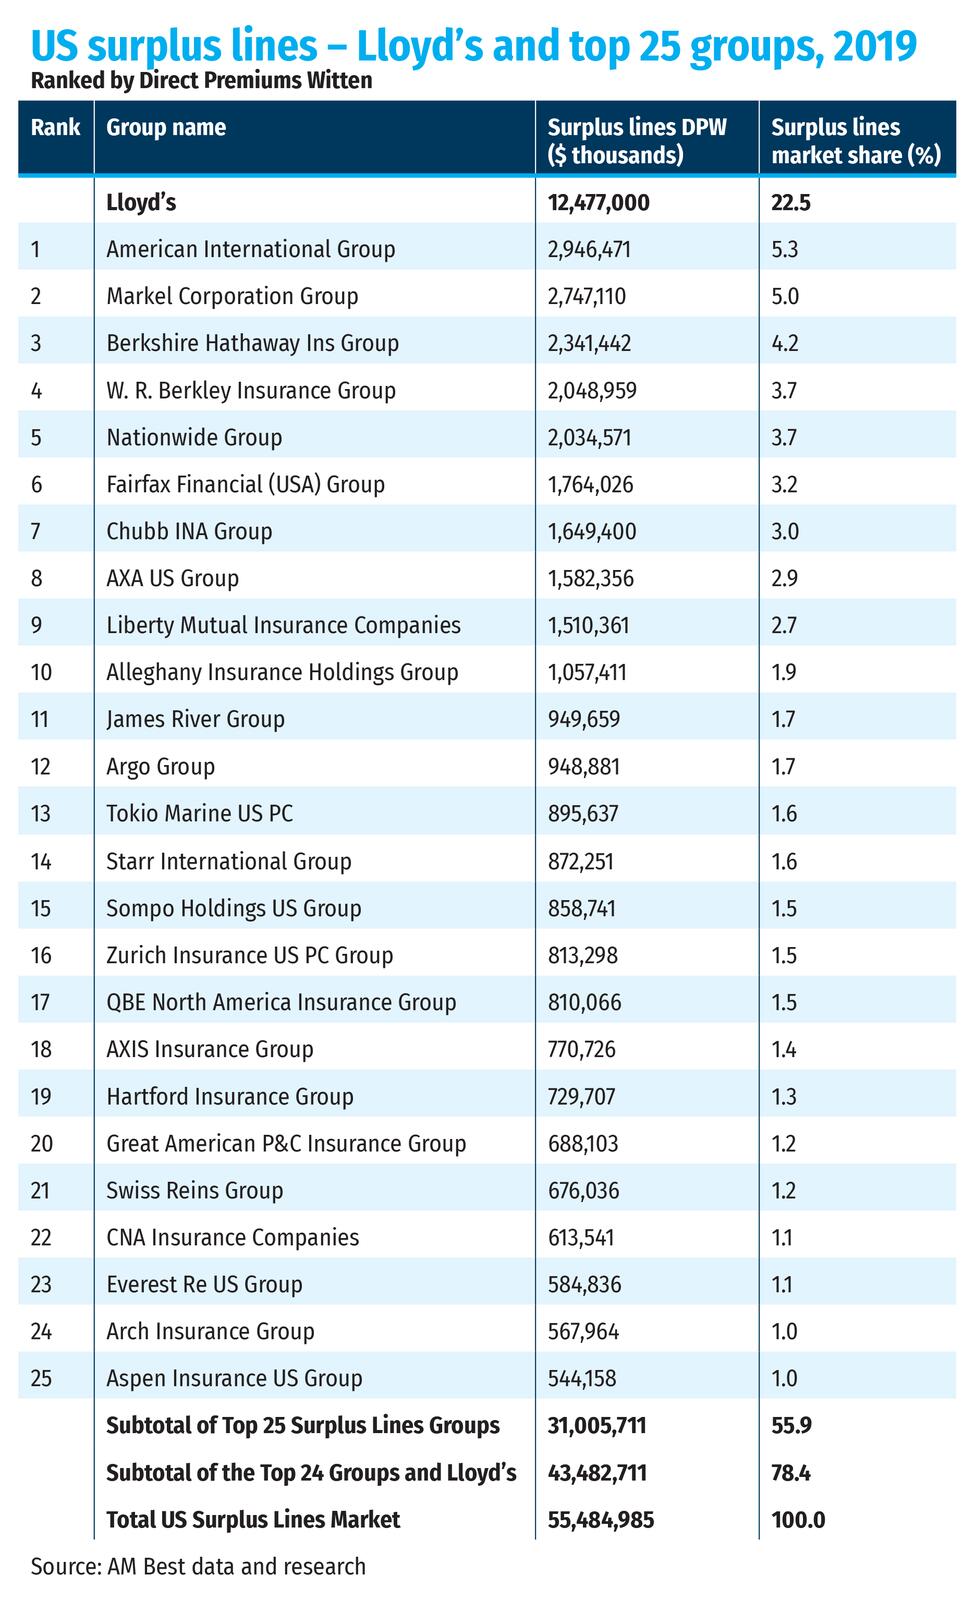 US surplus lines – Lloyd’s and top 25 groups, 2019 Ranked by Direct Premiums Witten